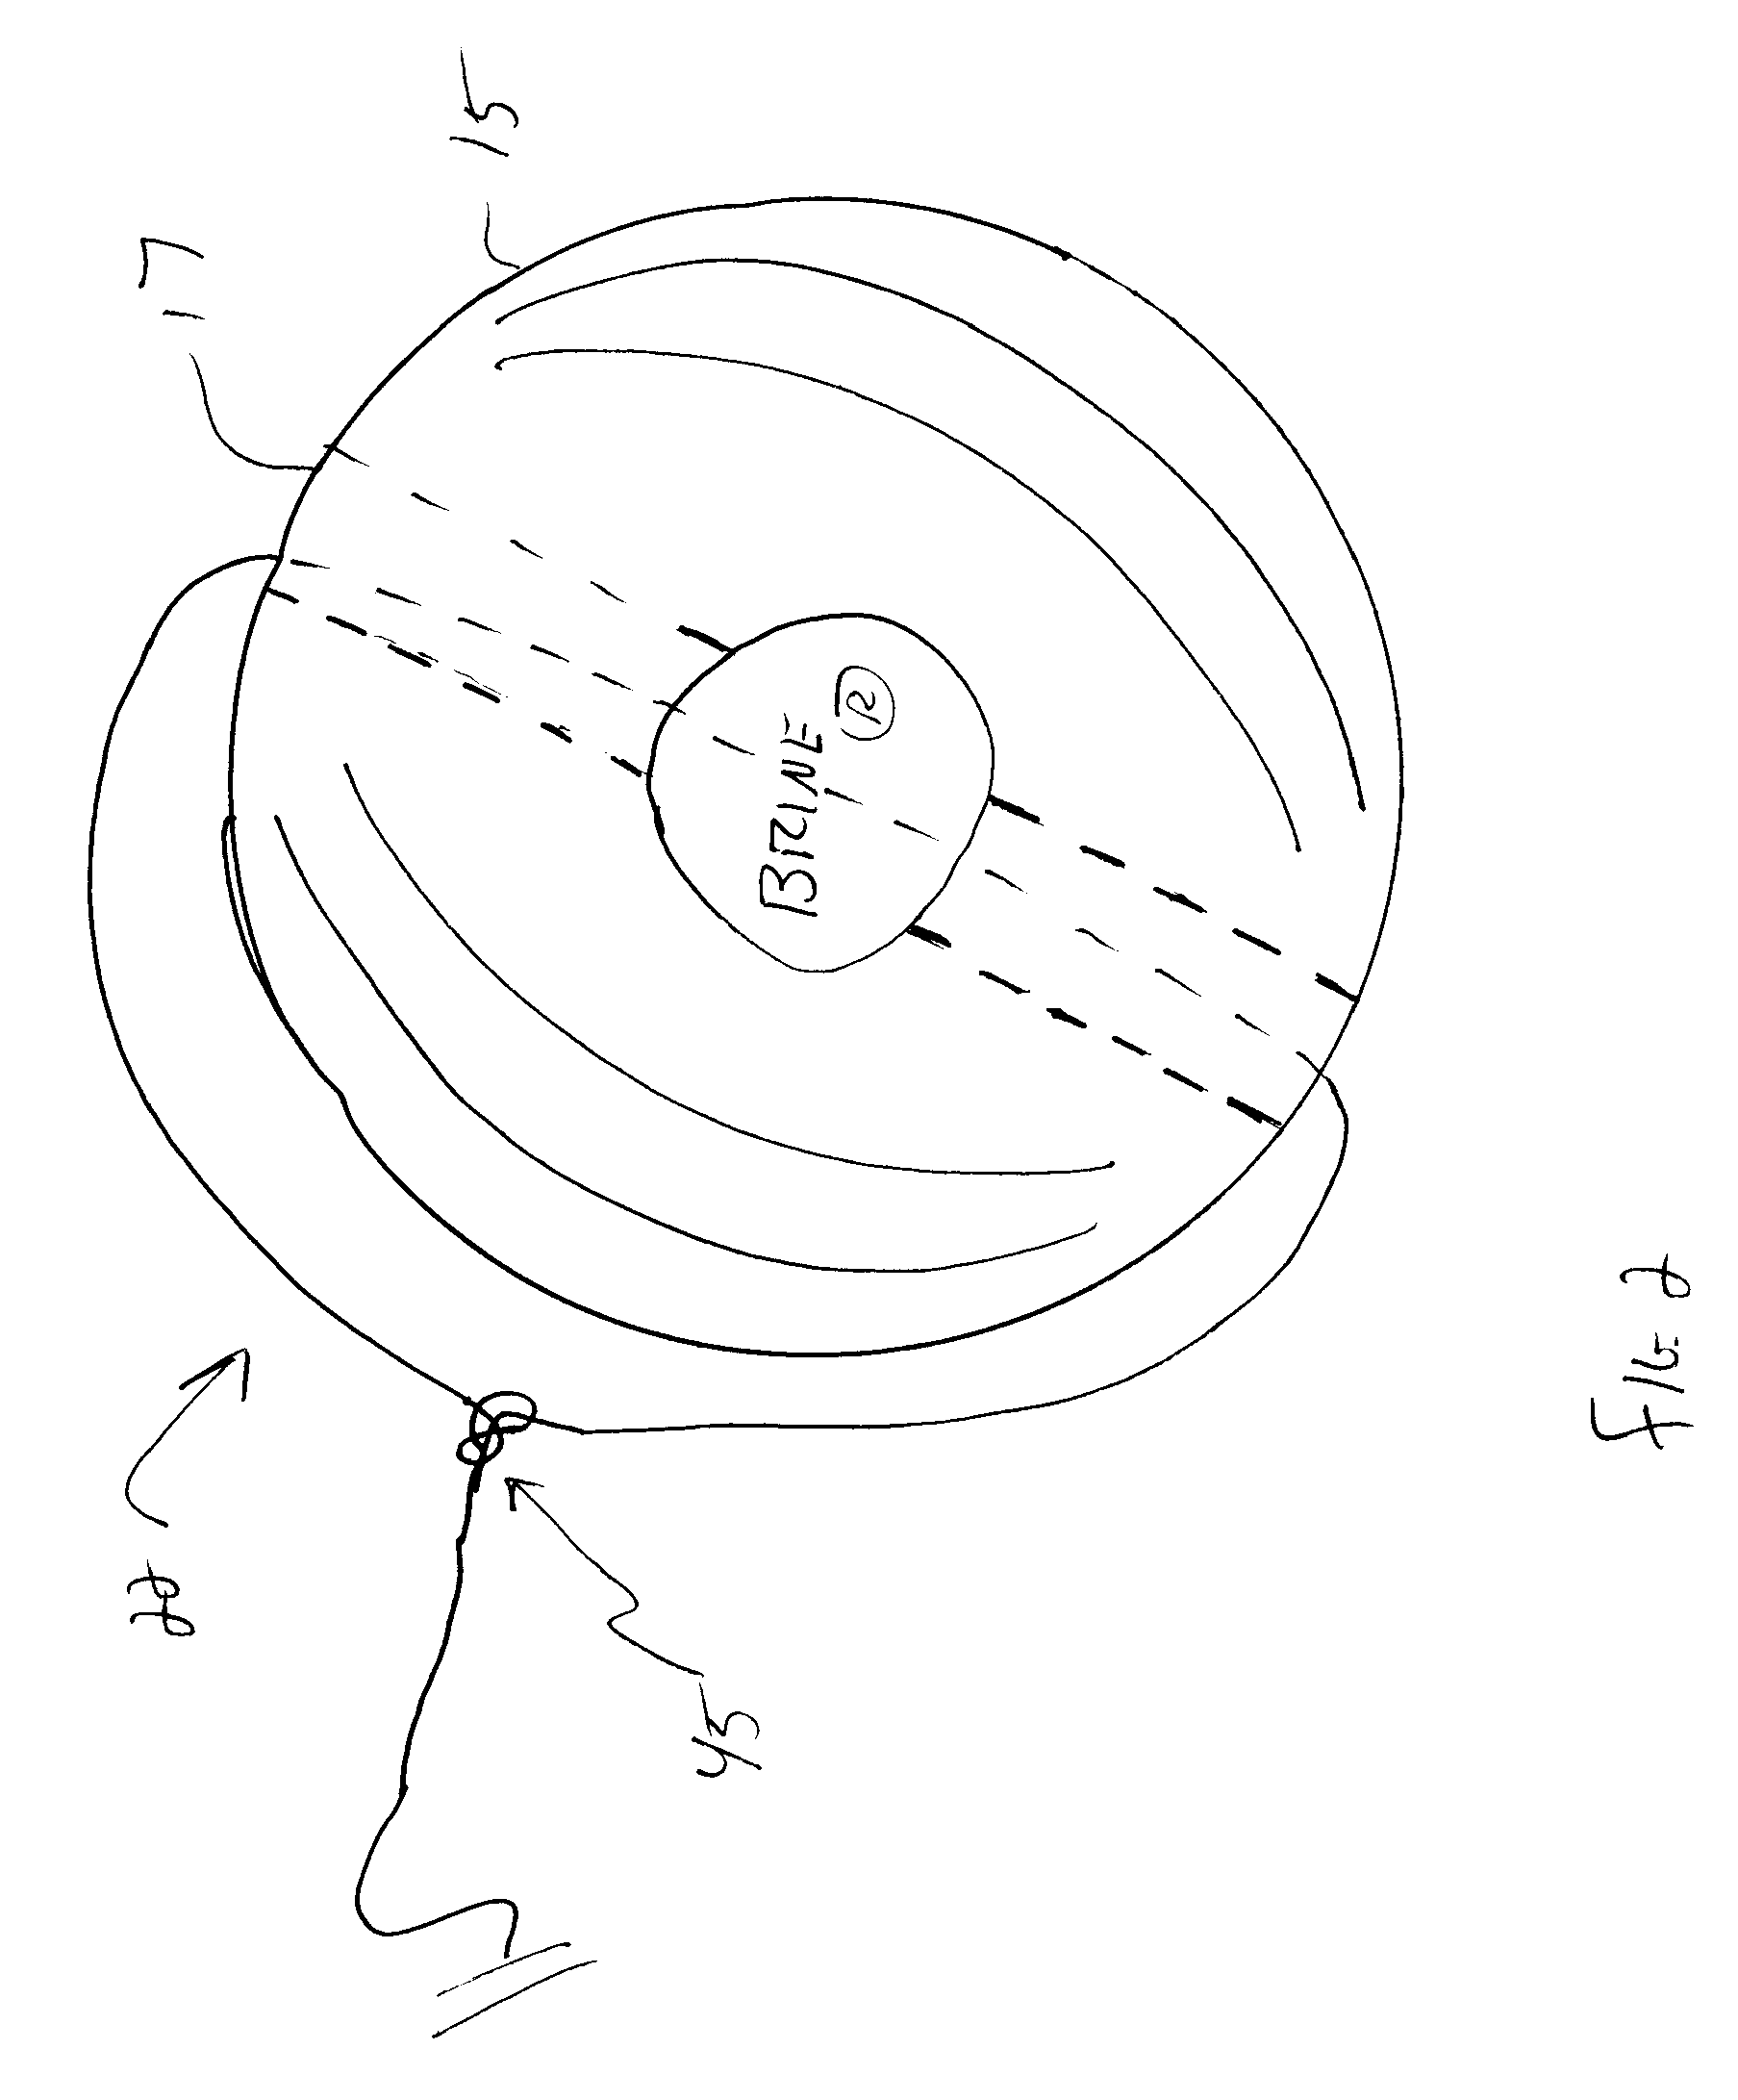 Lacrosse ball and stick practice apparatus and method of making same